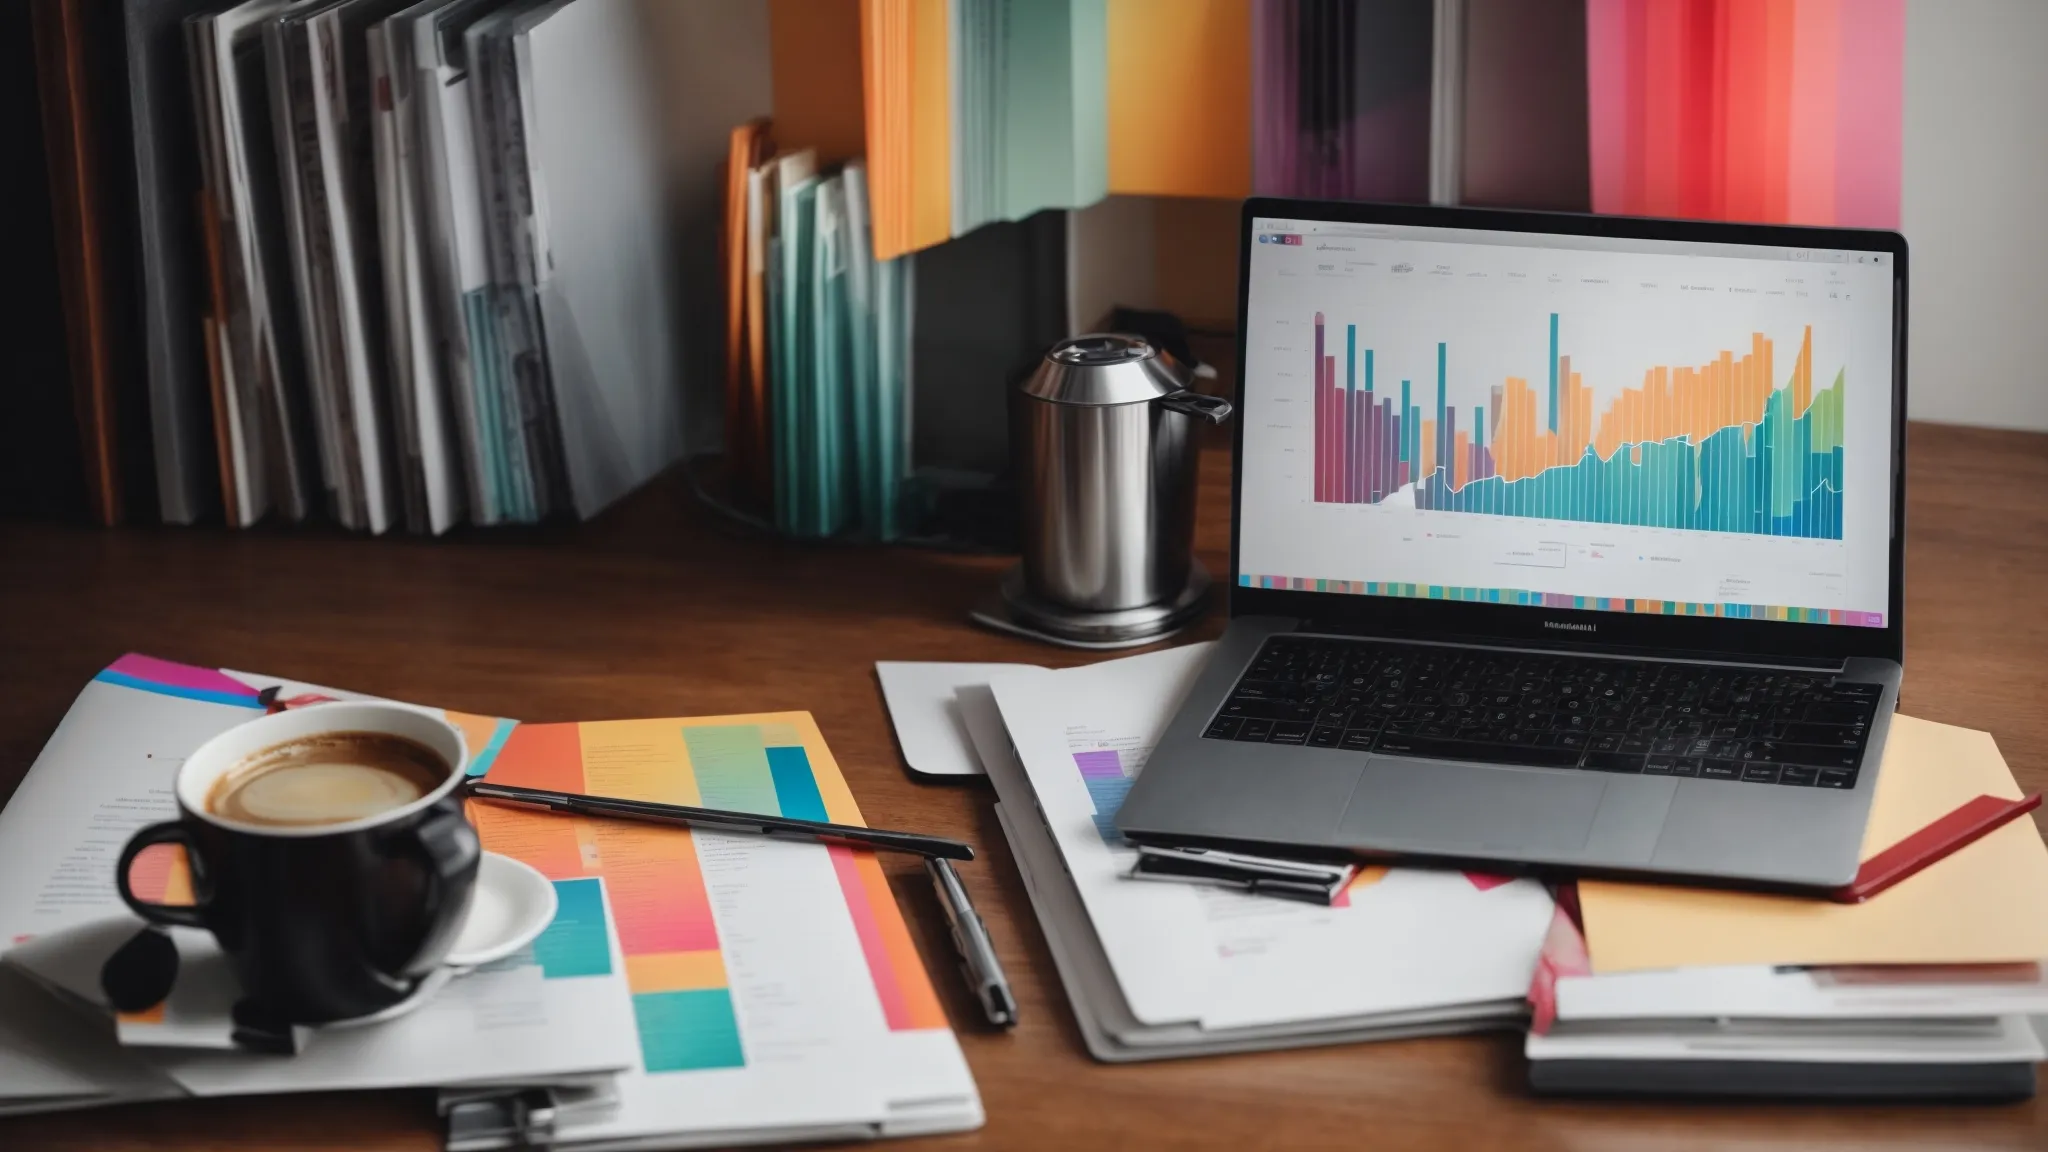 a laptop on a desk displaying colorful graphs and charts depicting keyword trends surrounded by notepads and a cup of coffee.